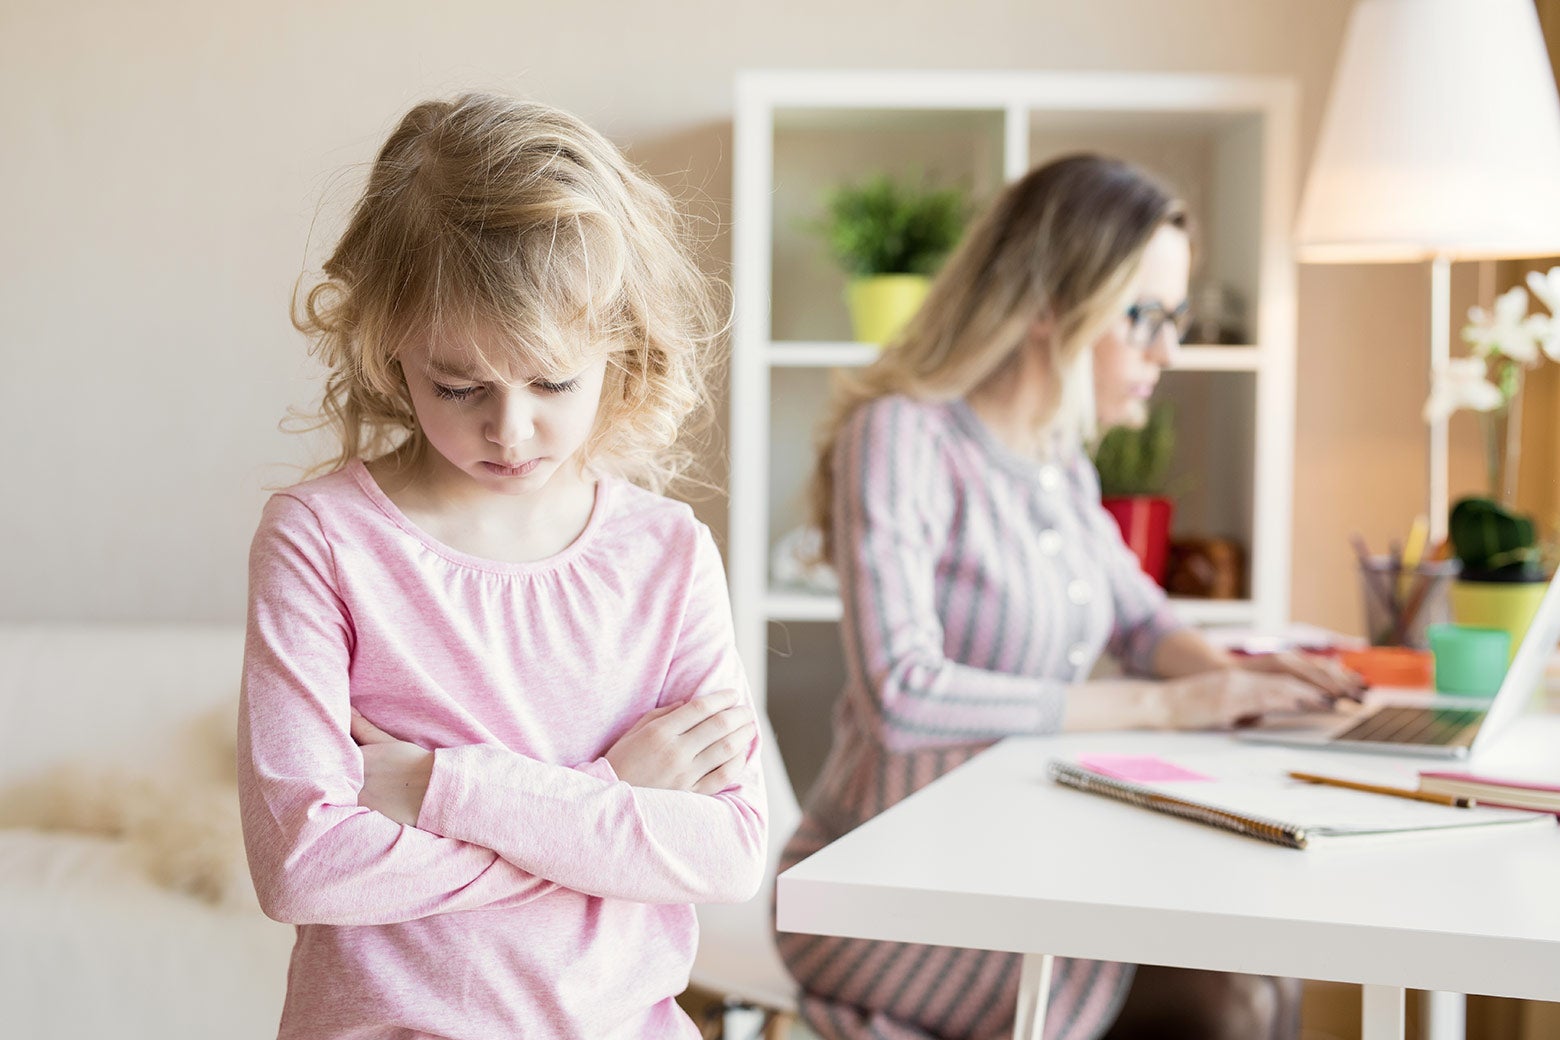 A child frowns while her mom blogs about her frowning.